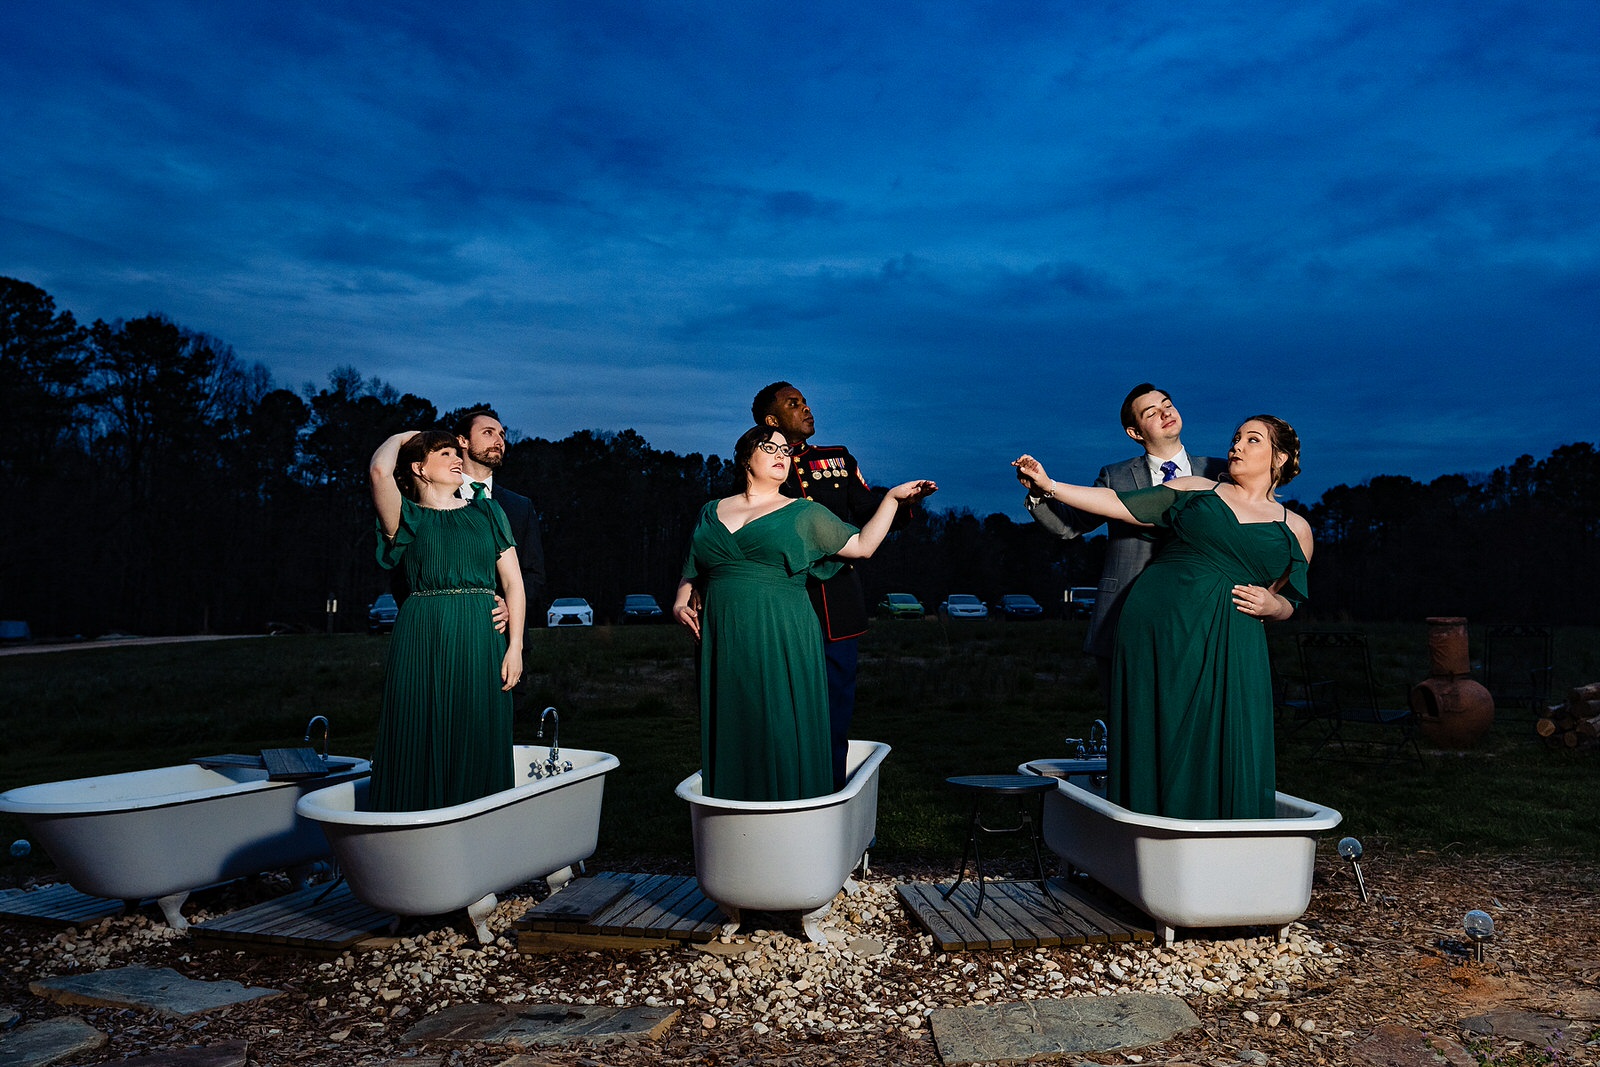 Members of the wedding pose dramatically in bathtubs at The Meadows Raleigh